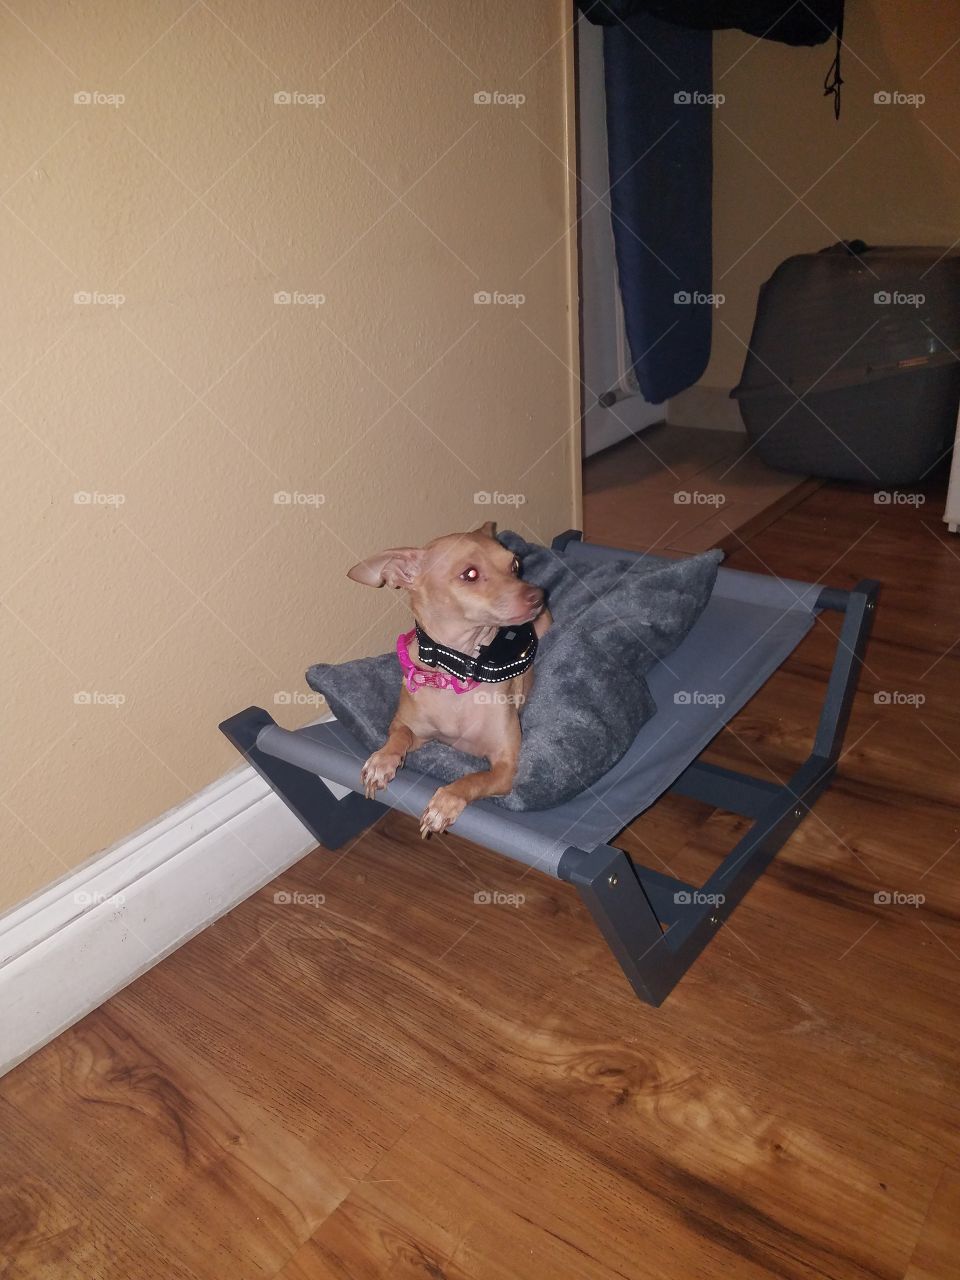 My dog's new place to sleep, i think she loves it and knows it's her bed. :)